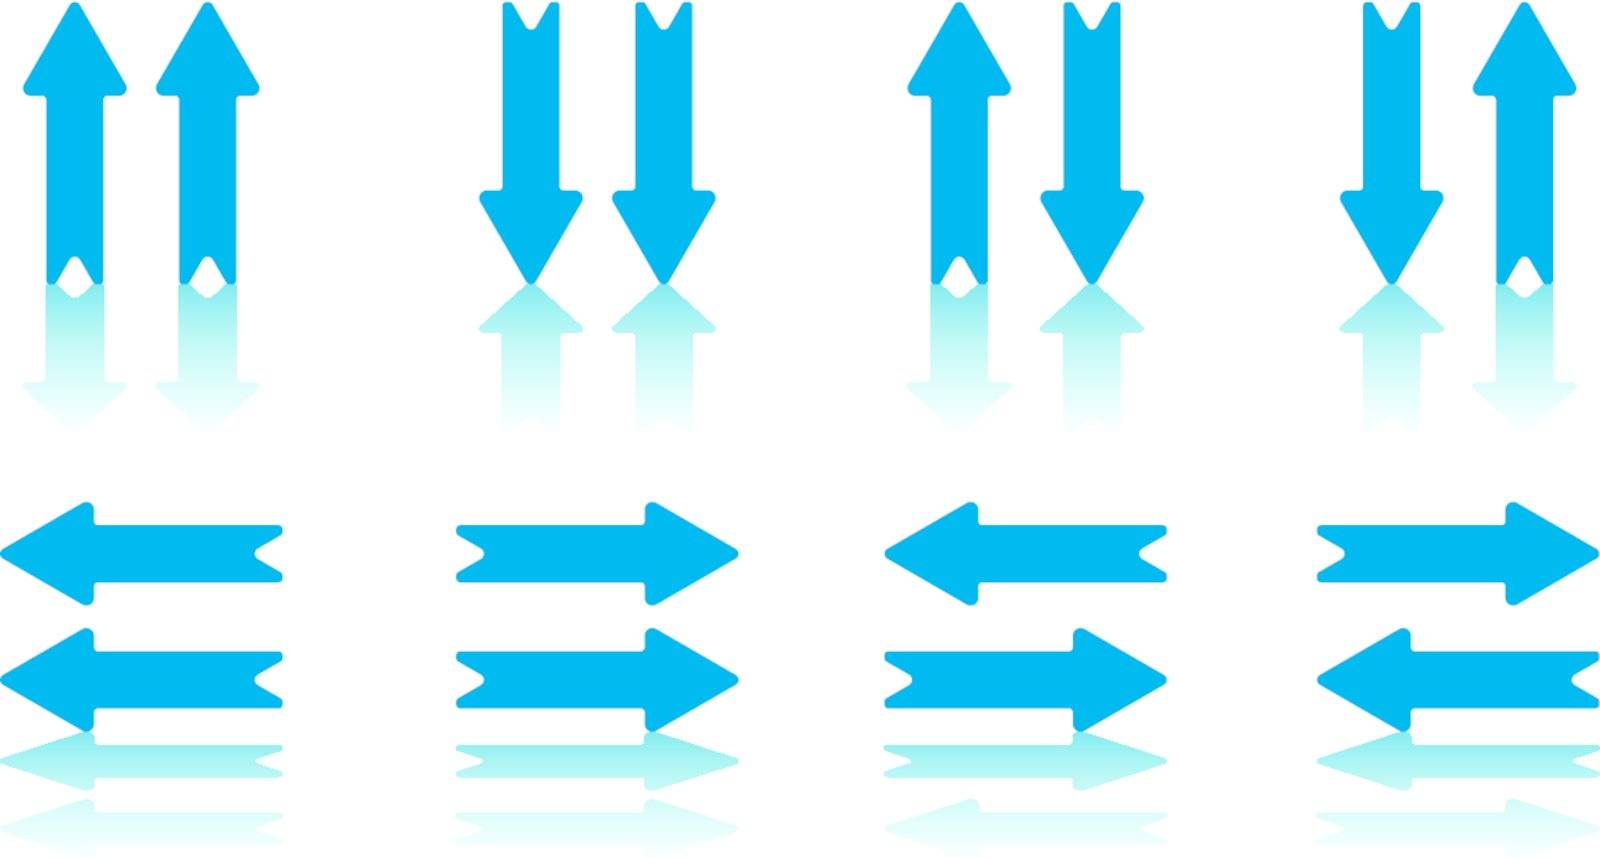 Collection of 8 Arrow Pairs With Reflection on Bottom Plane (jpeg file also has clipping path)